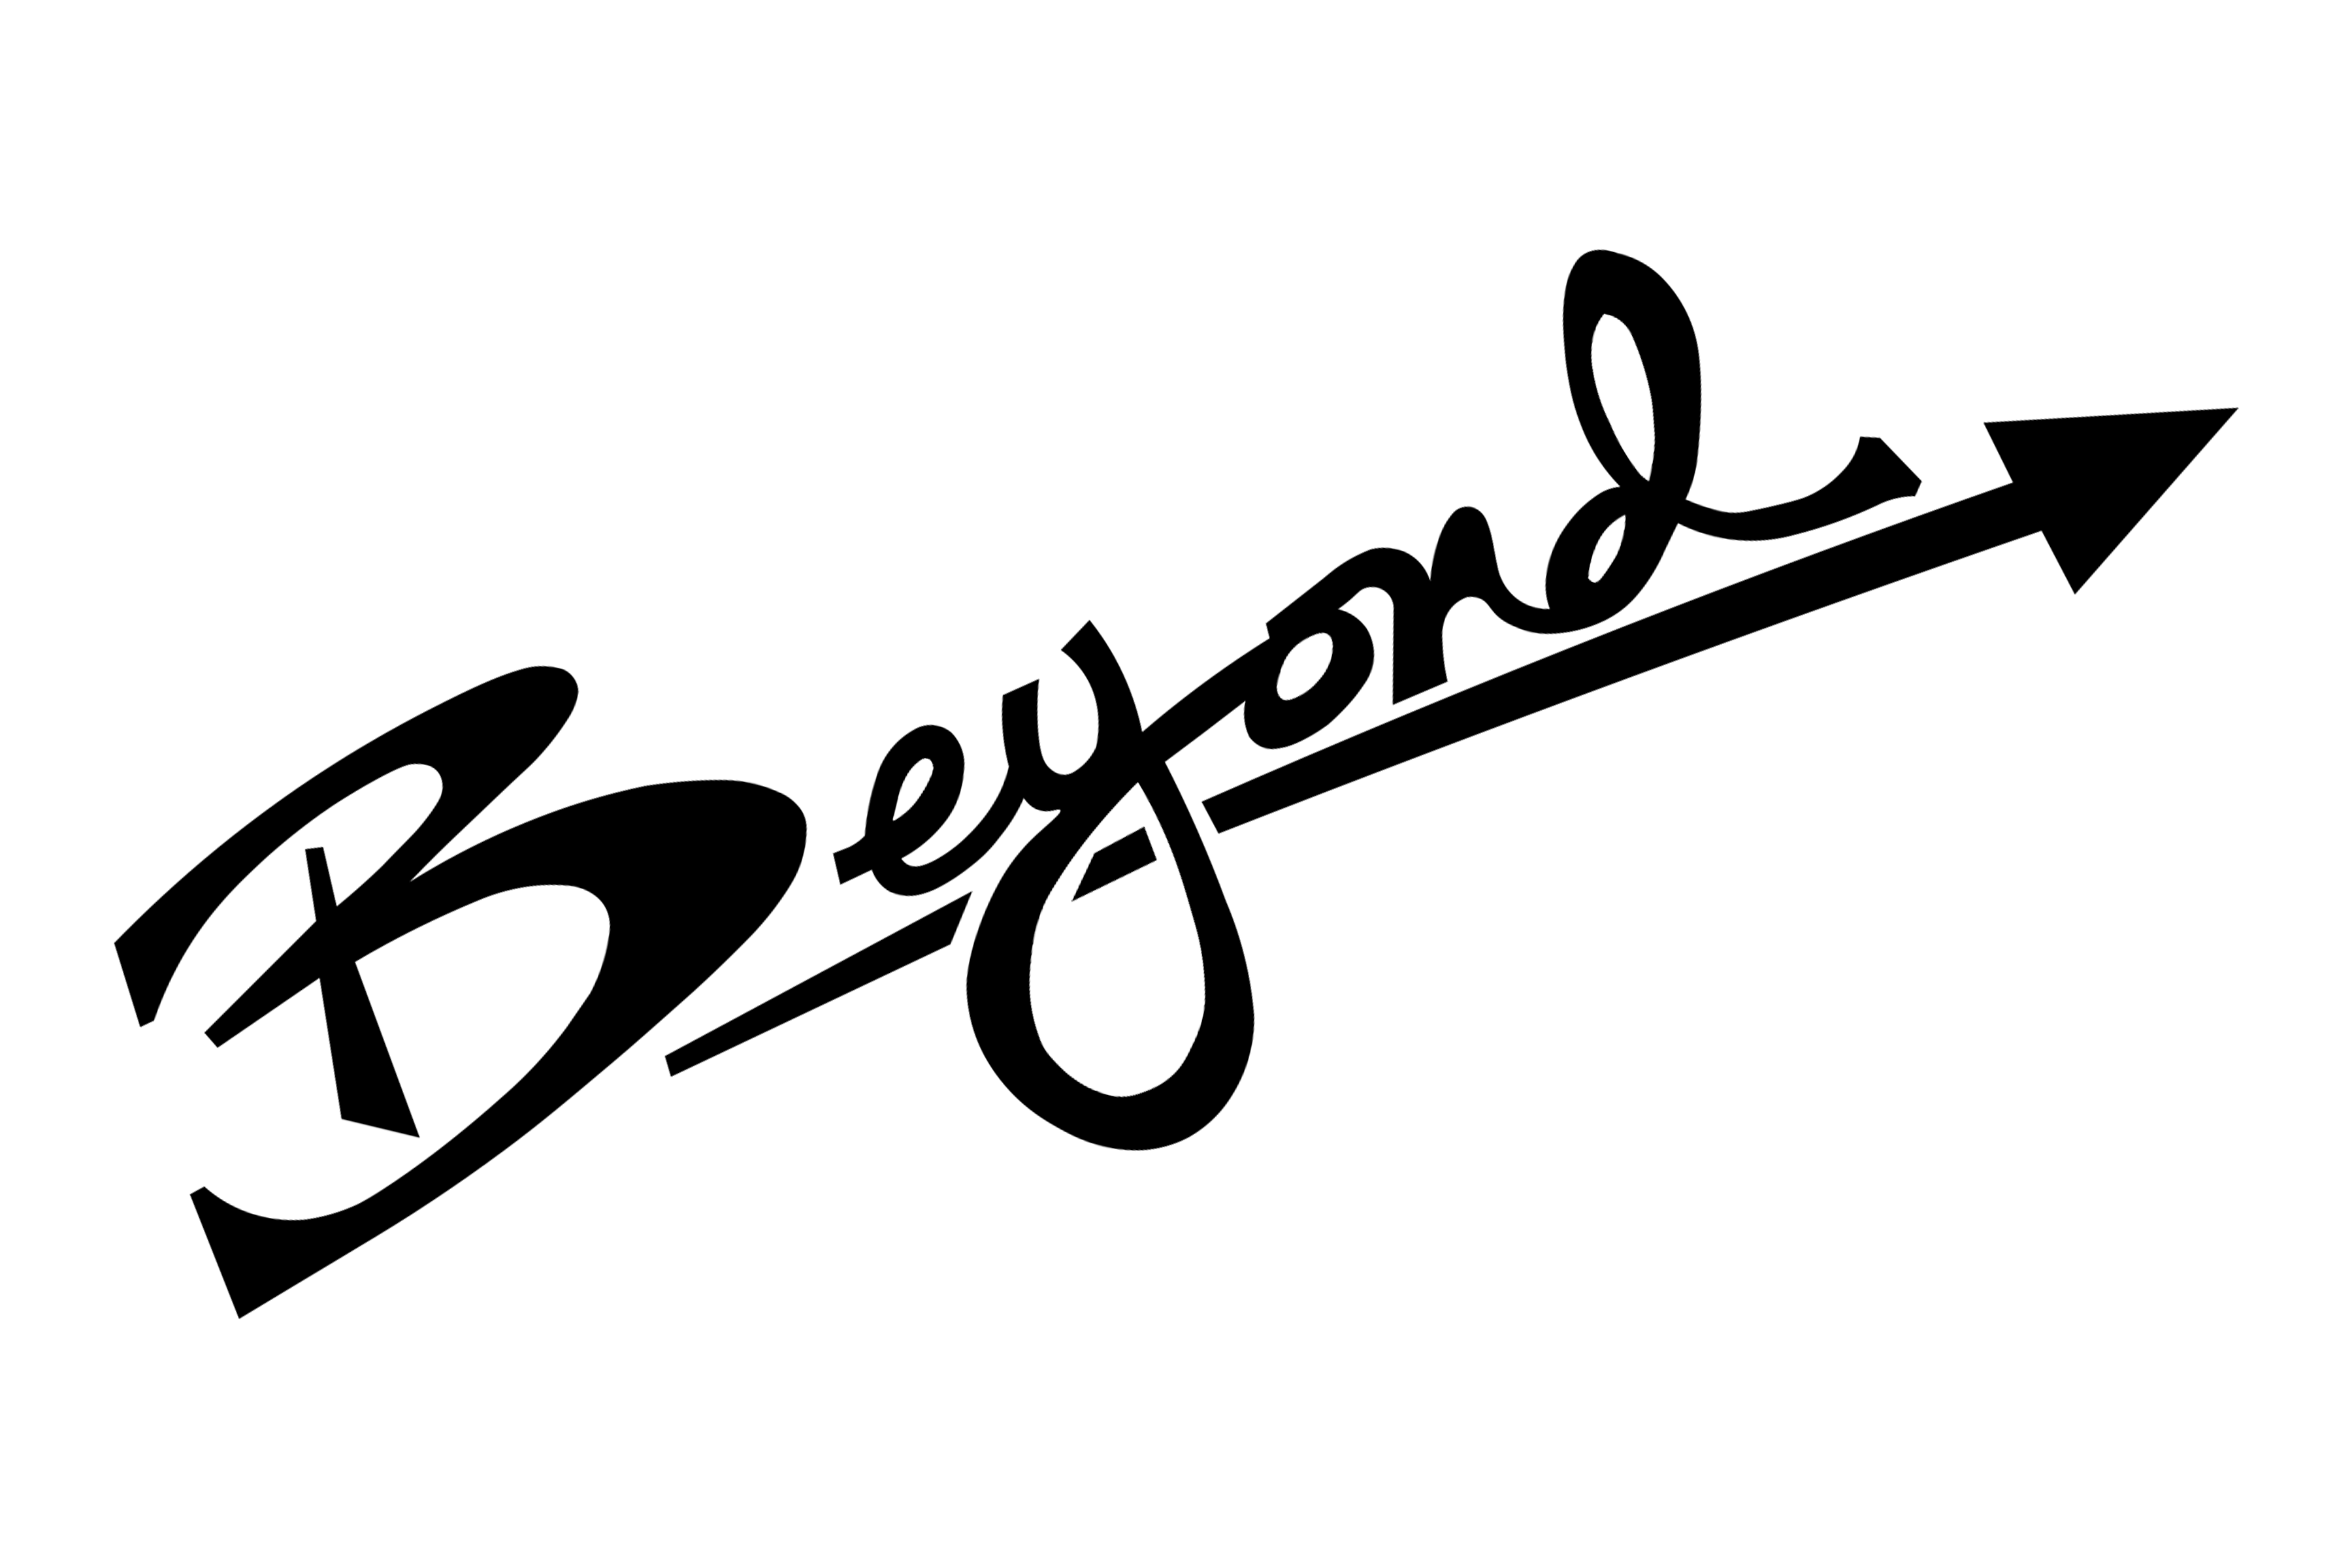 Shop the Beyond Gallery